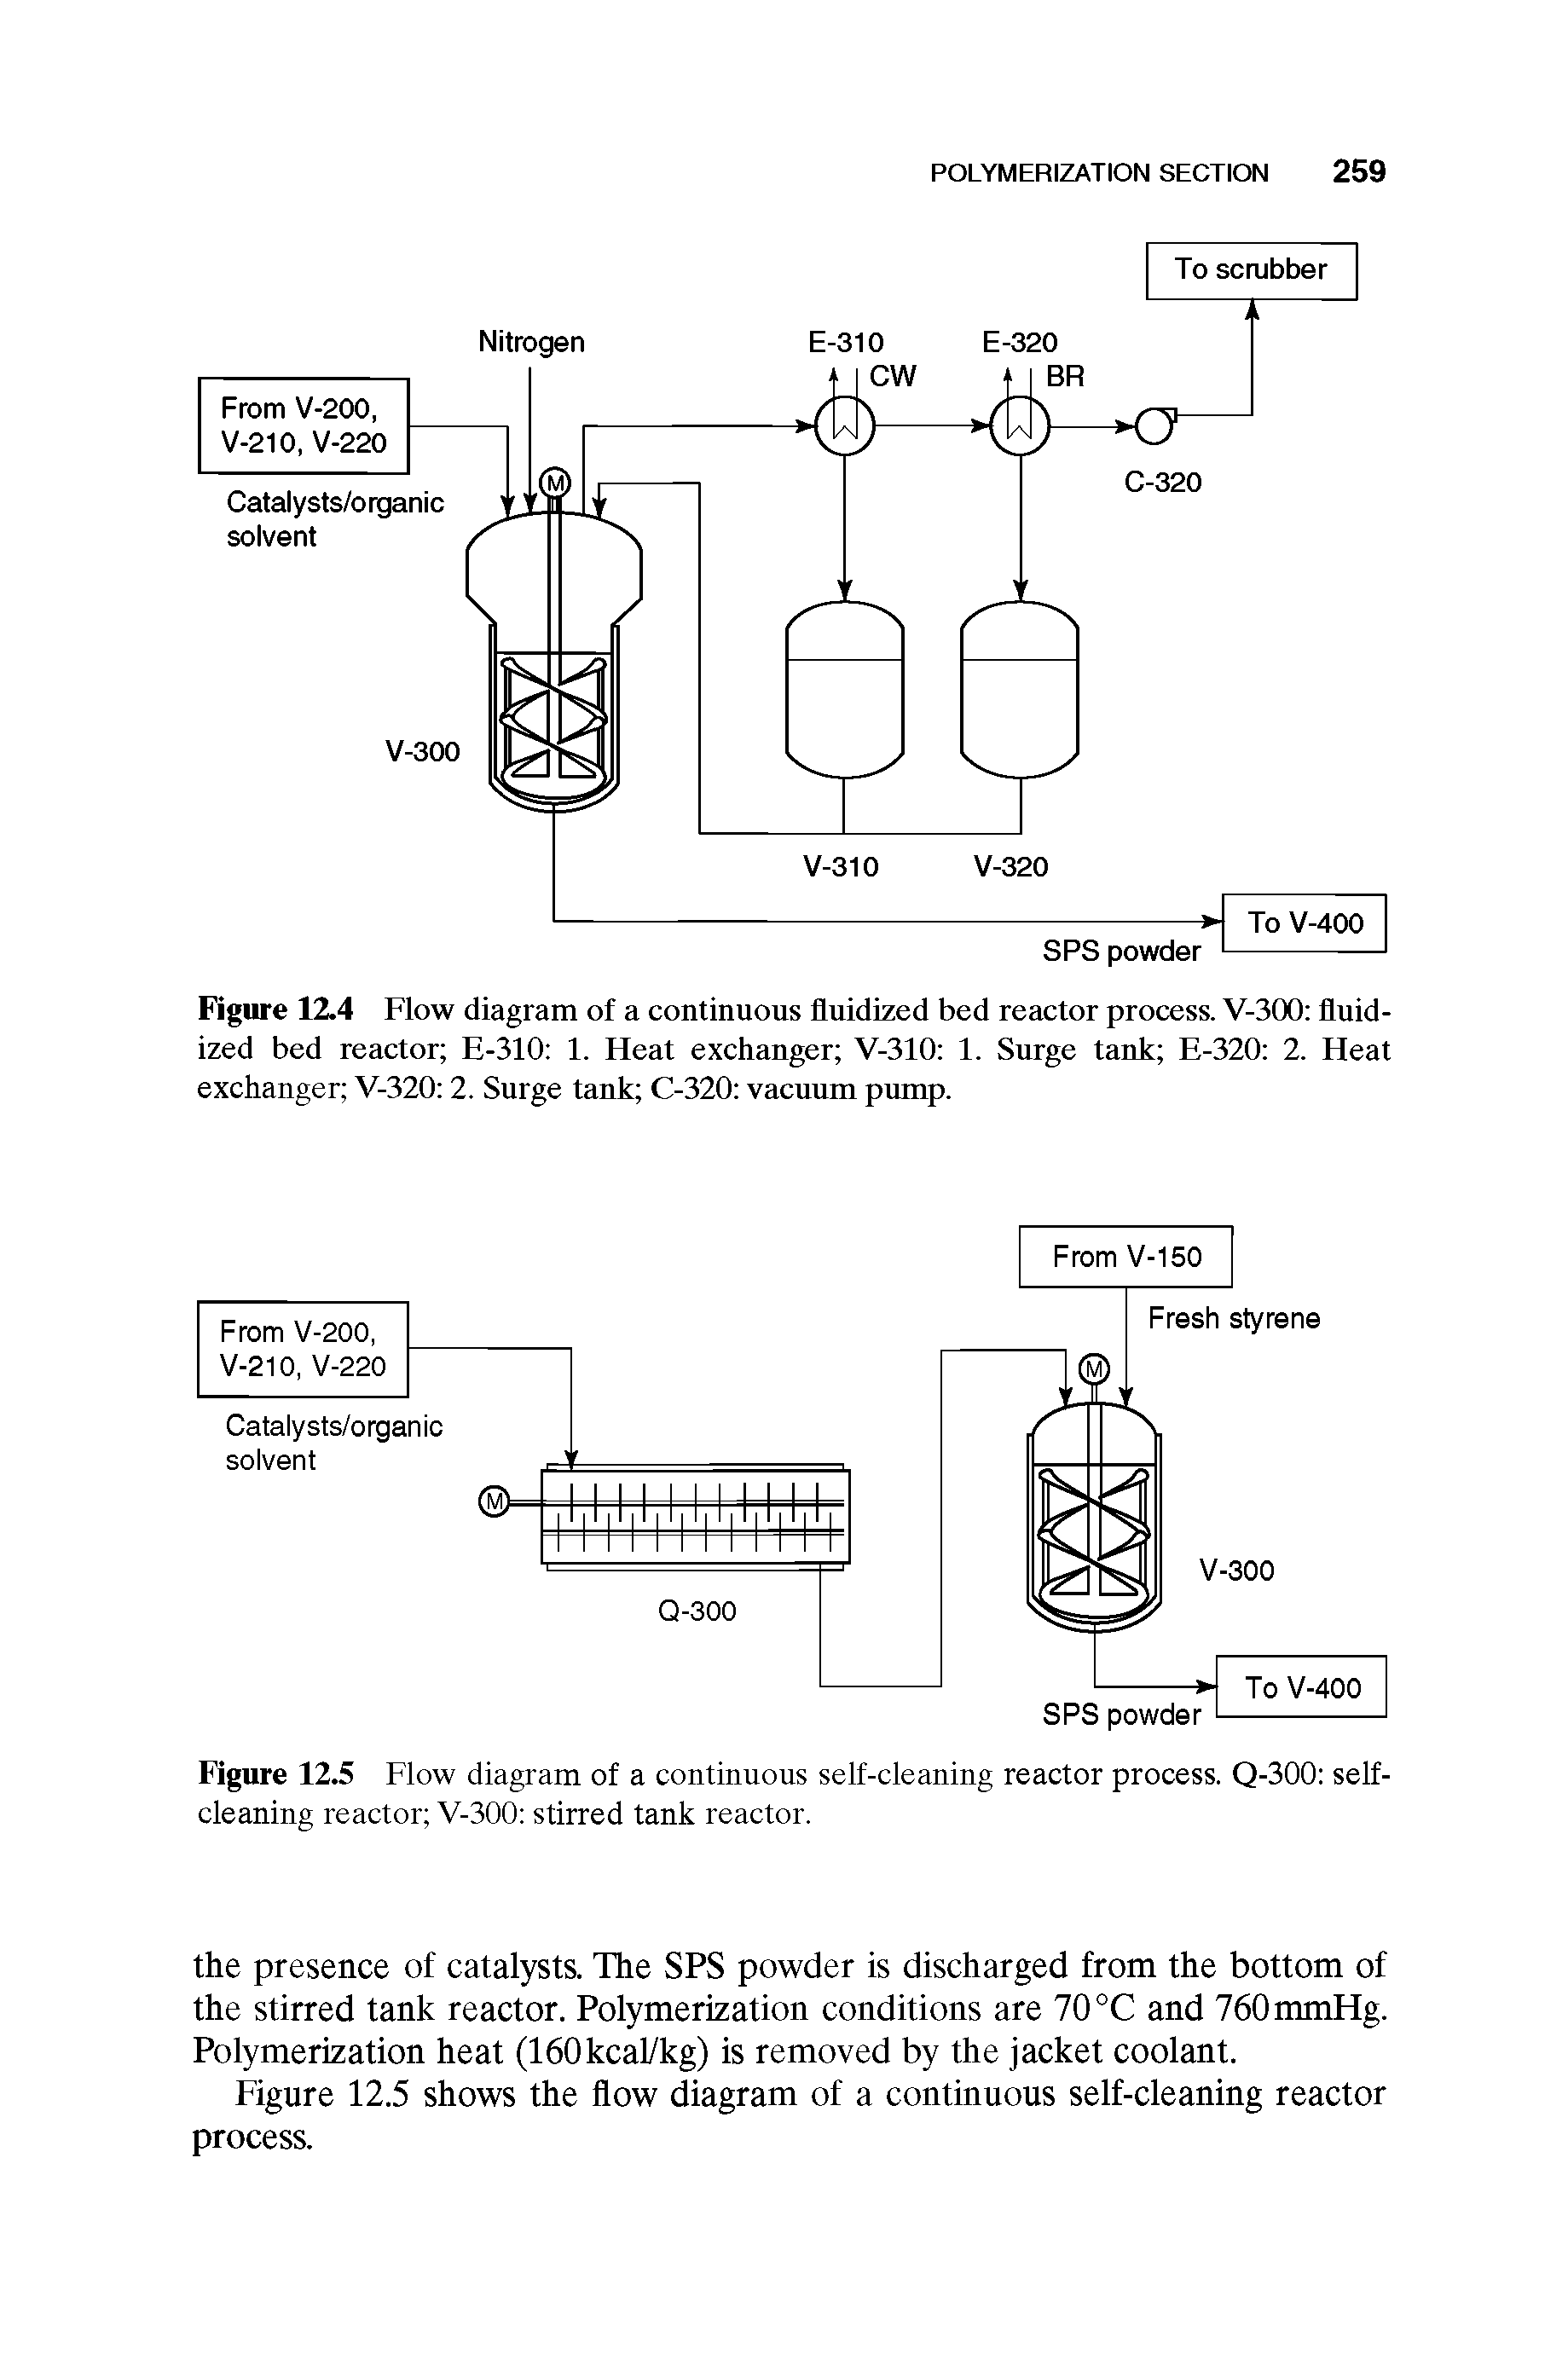 Figure 12.5 Flow diagram of a continuous self-cleaning reactor process. Q-300 selfcleaning reactor V-300 stirred tank reactor.